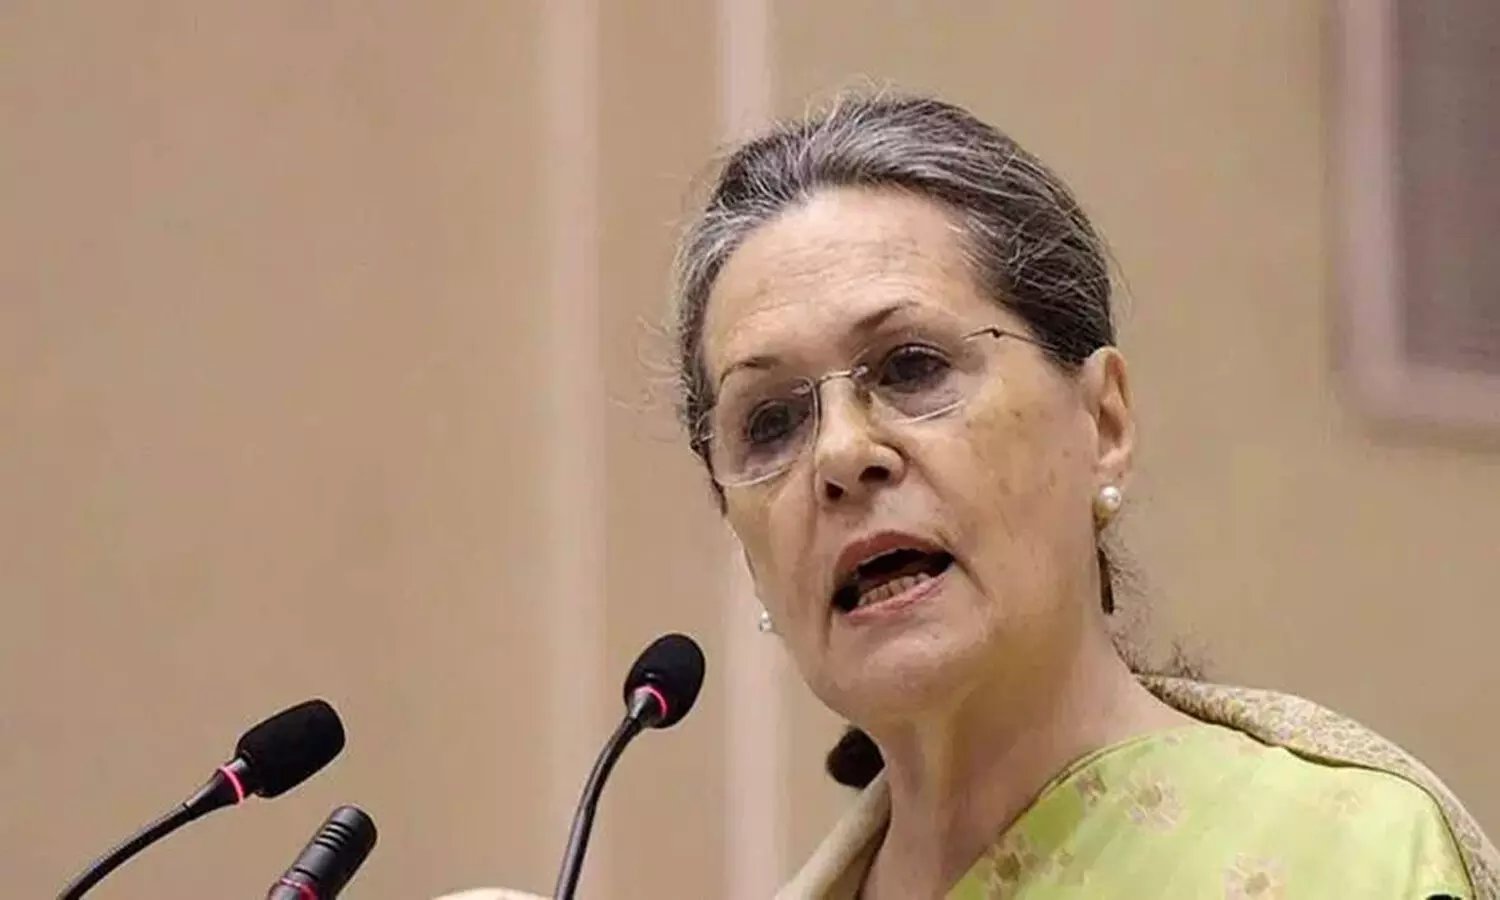 Congress will seek full-fledged discussion in Parliament on border situation: Sonia Gandhi